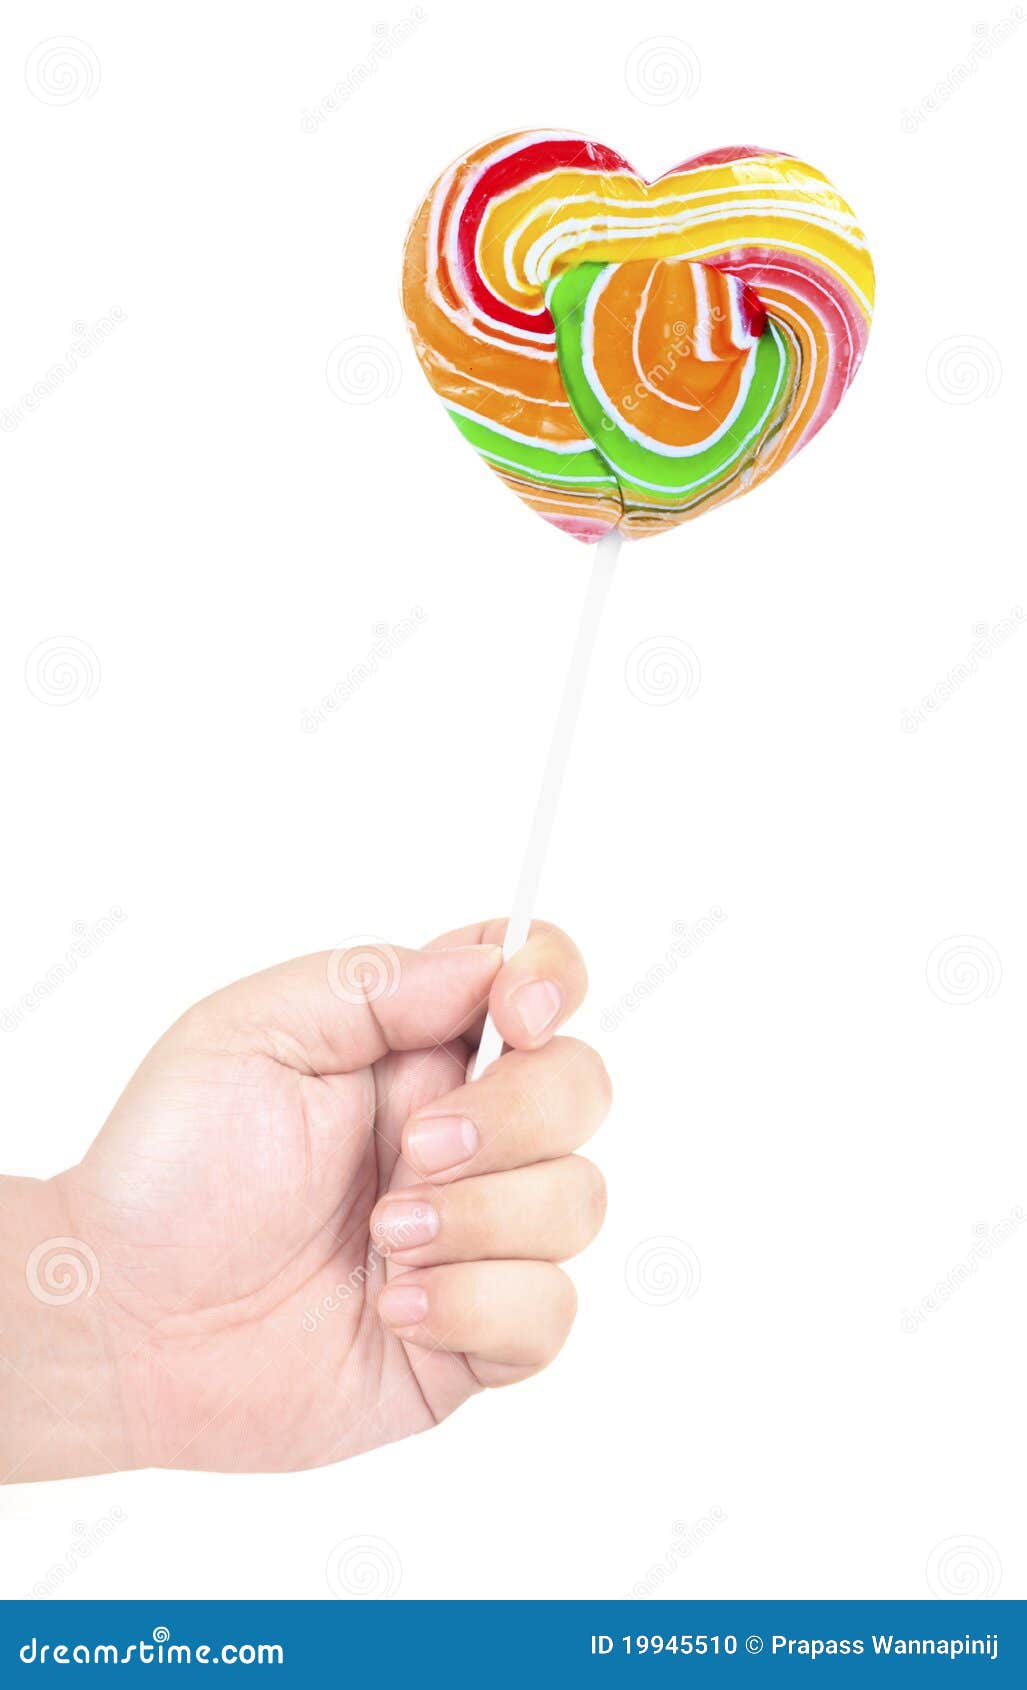 Hand Give Colorful Heart Shape Lollipop Isolated Stock Photo - Image of ...